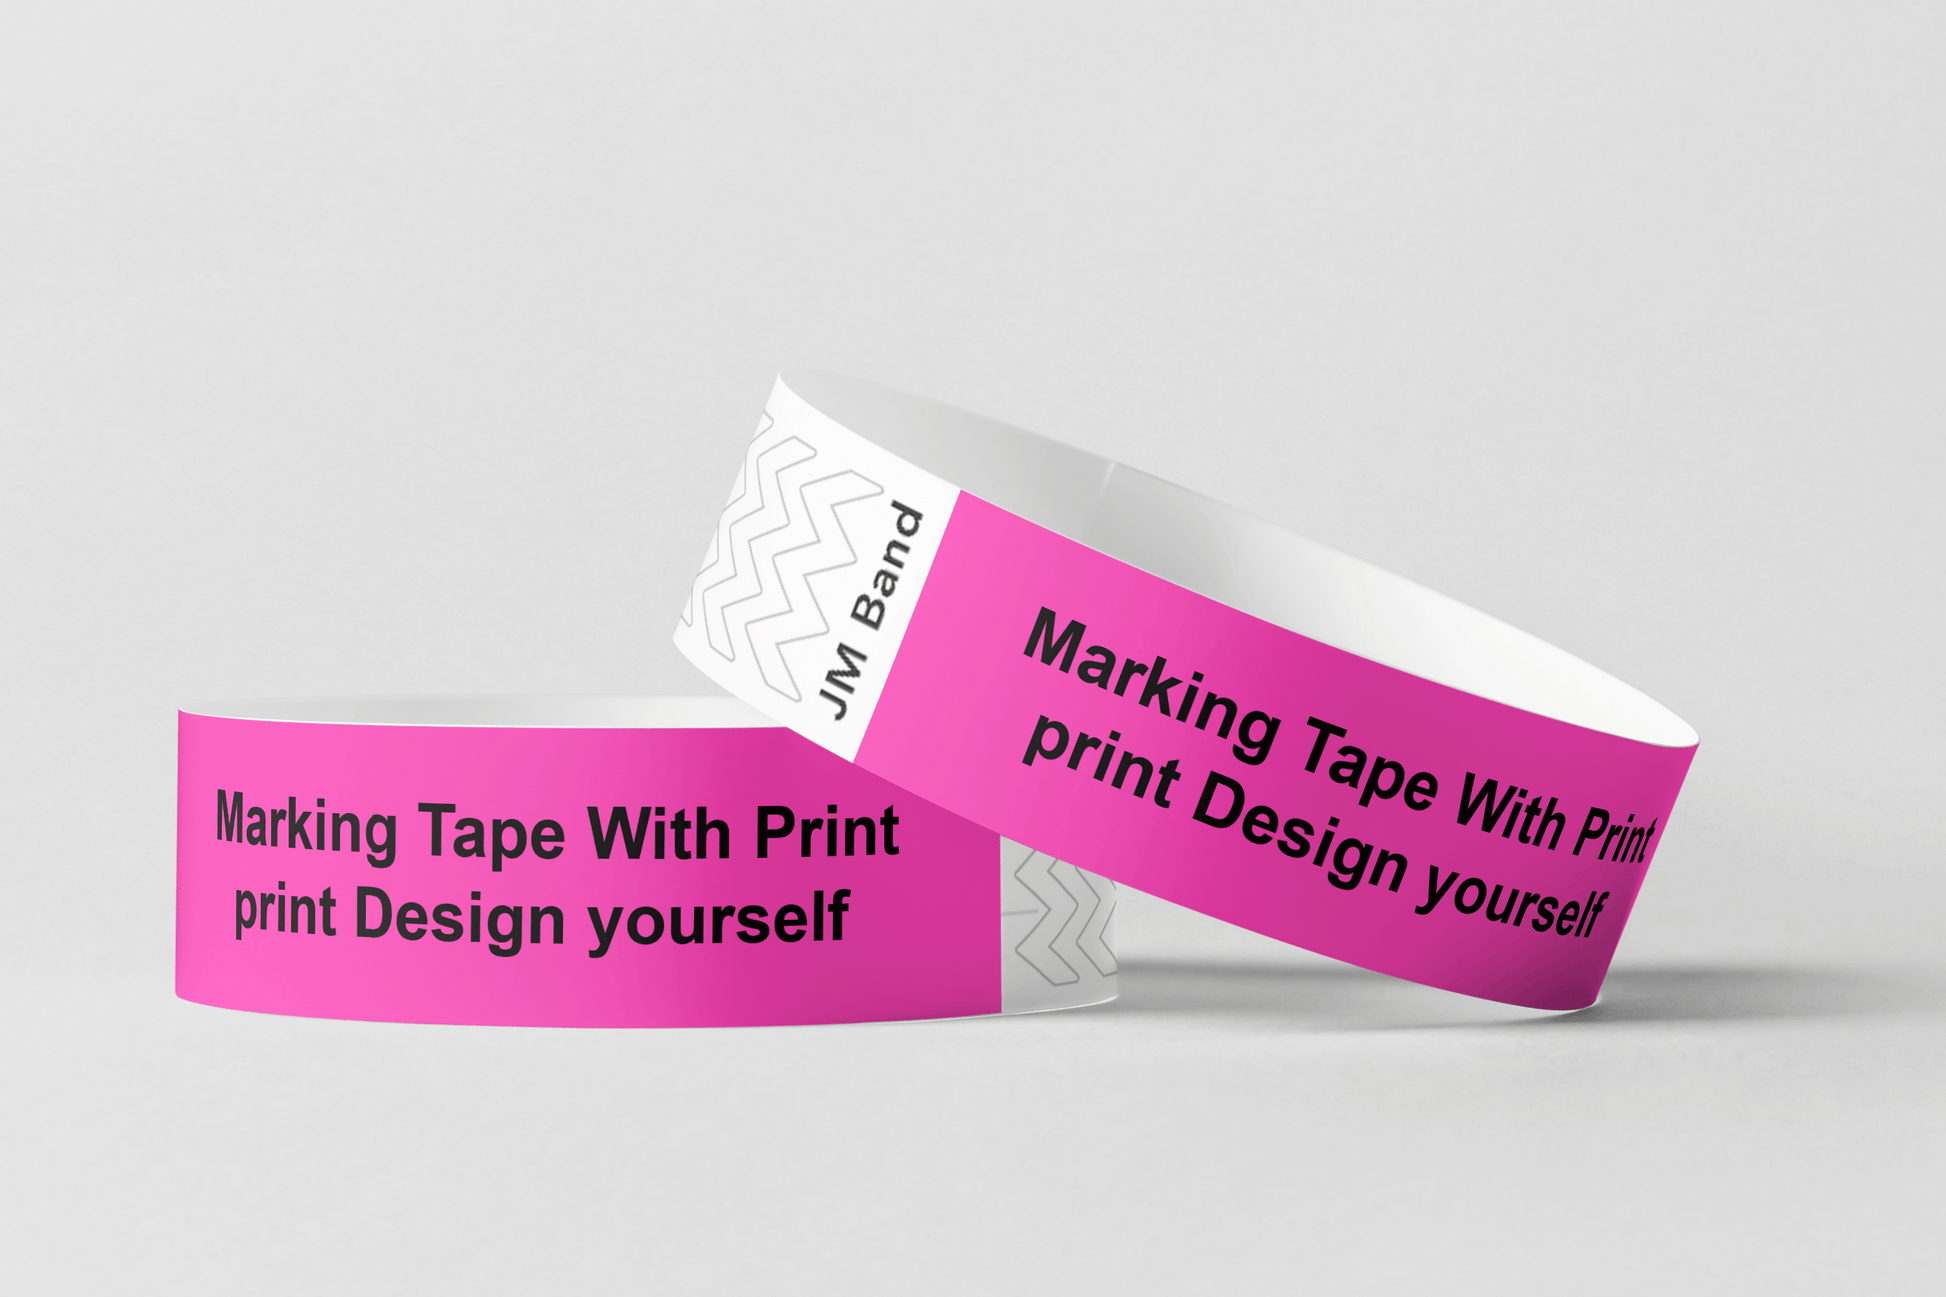 Marking Tape With Print Paper wristbands JM Band EU 10 Pink 